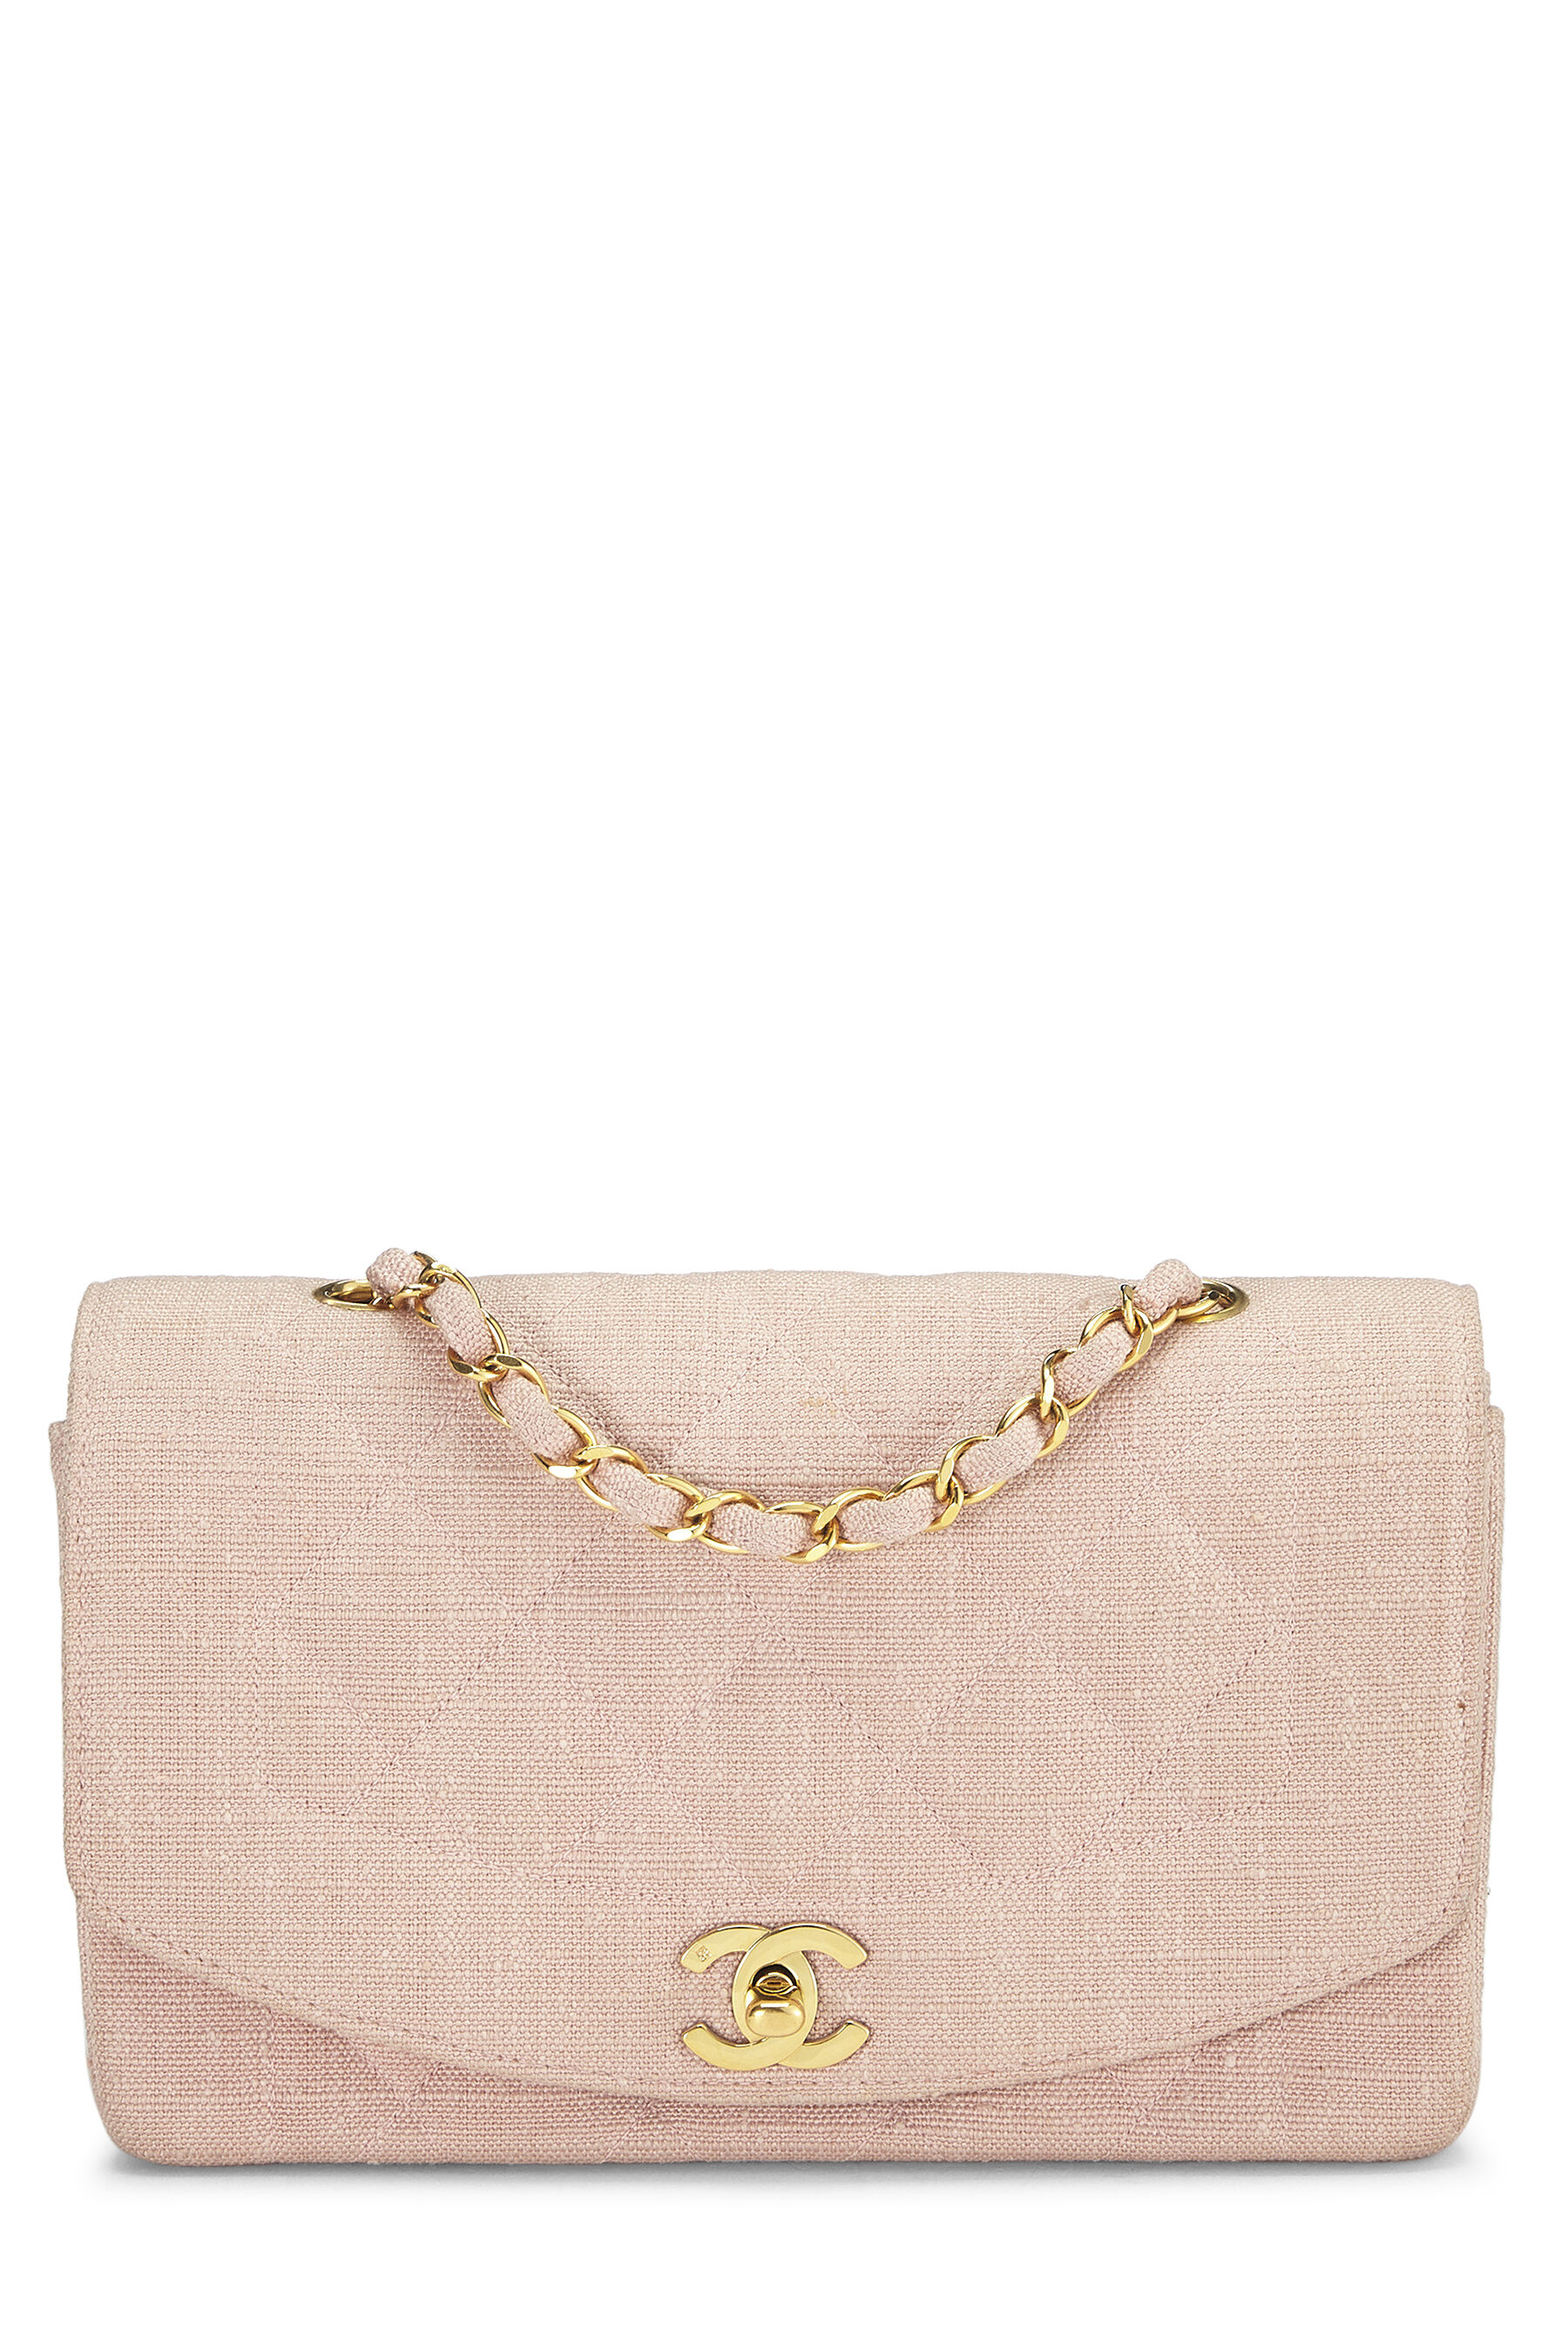 Chanel - Pink Linen Diana Flap Small